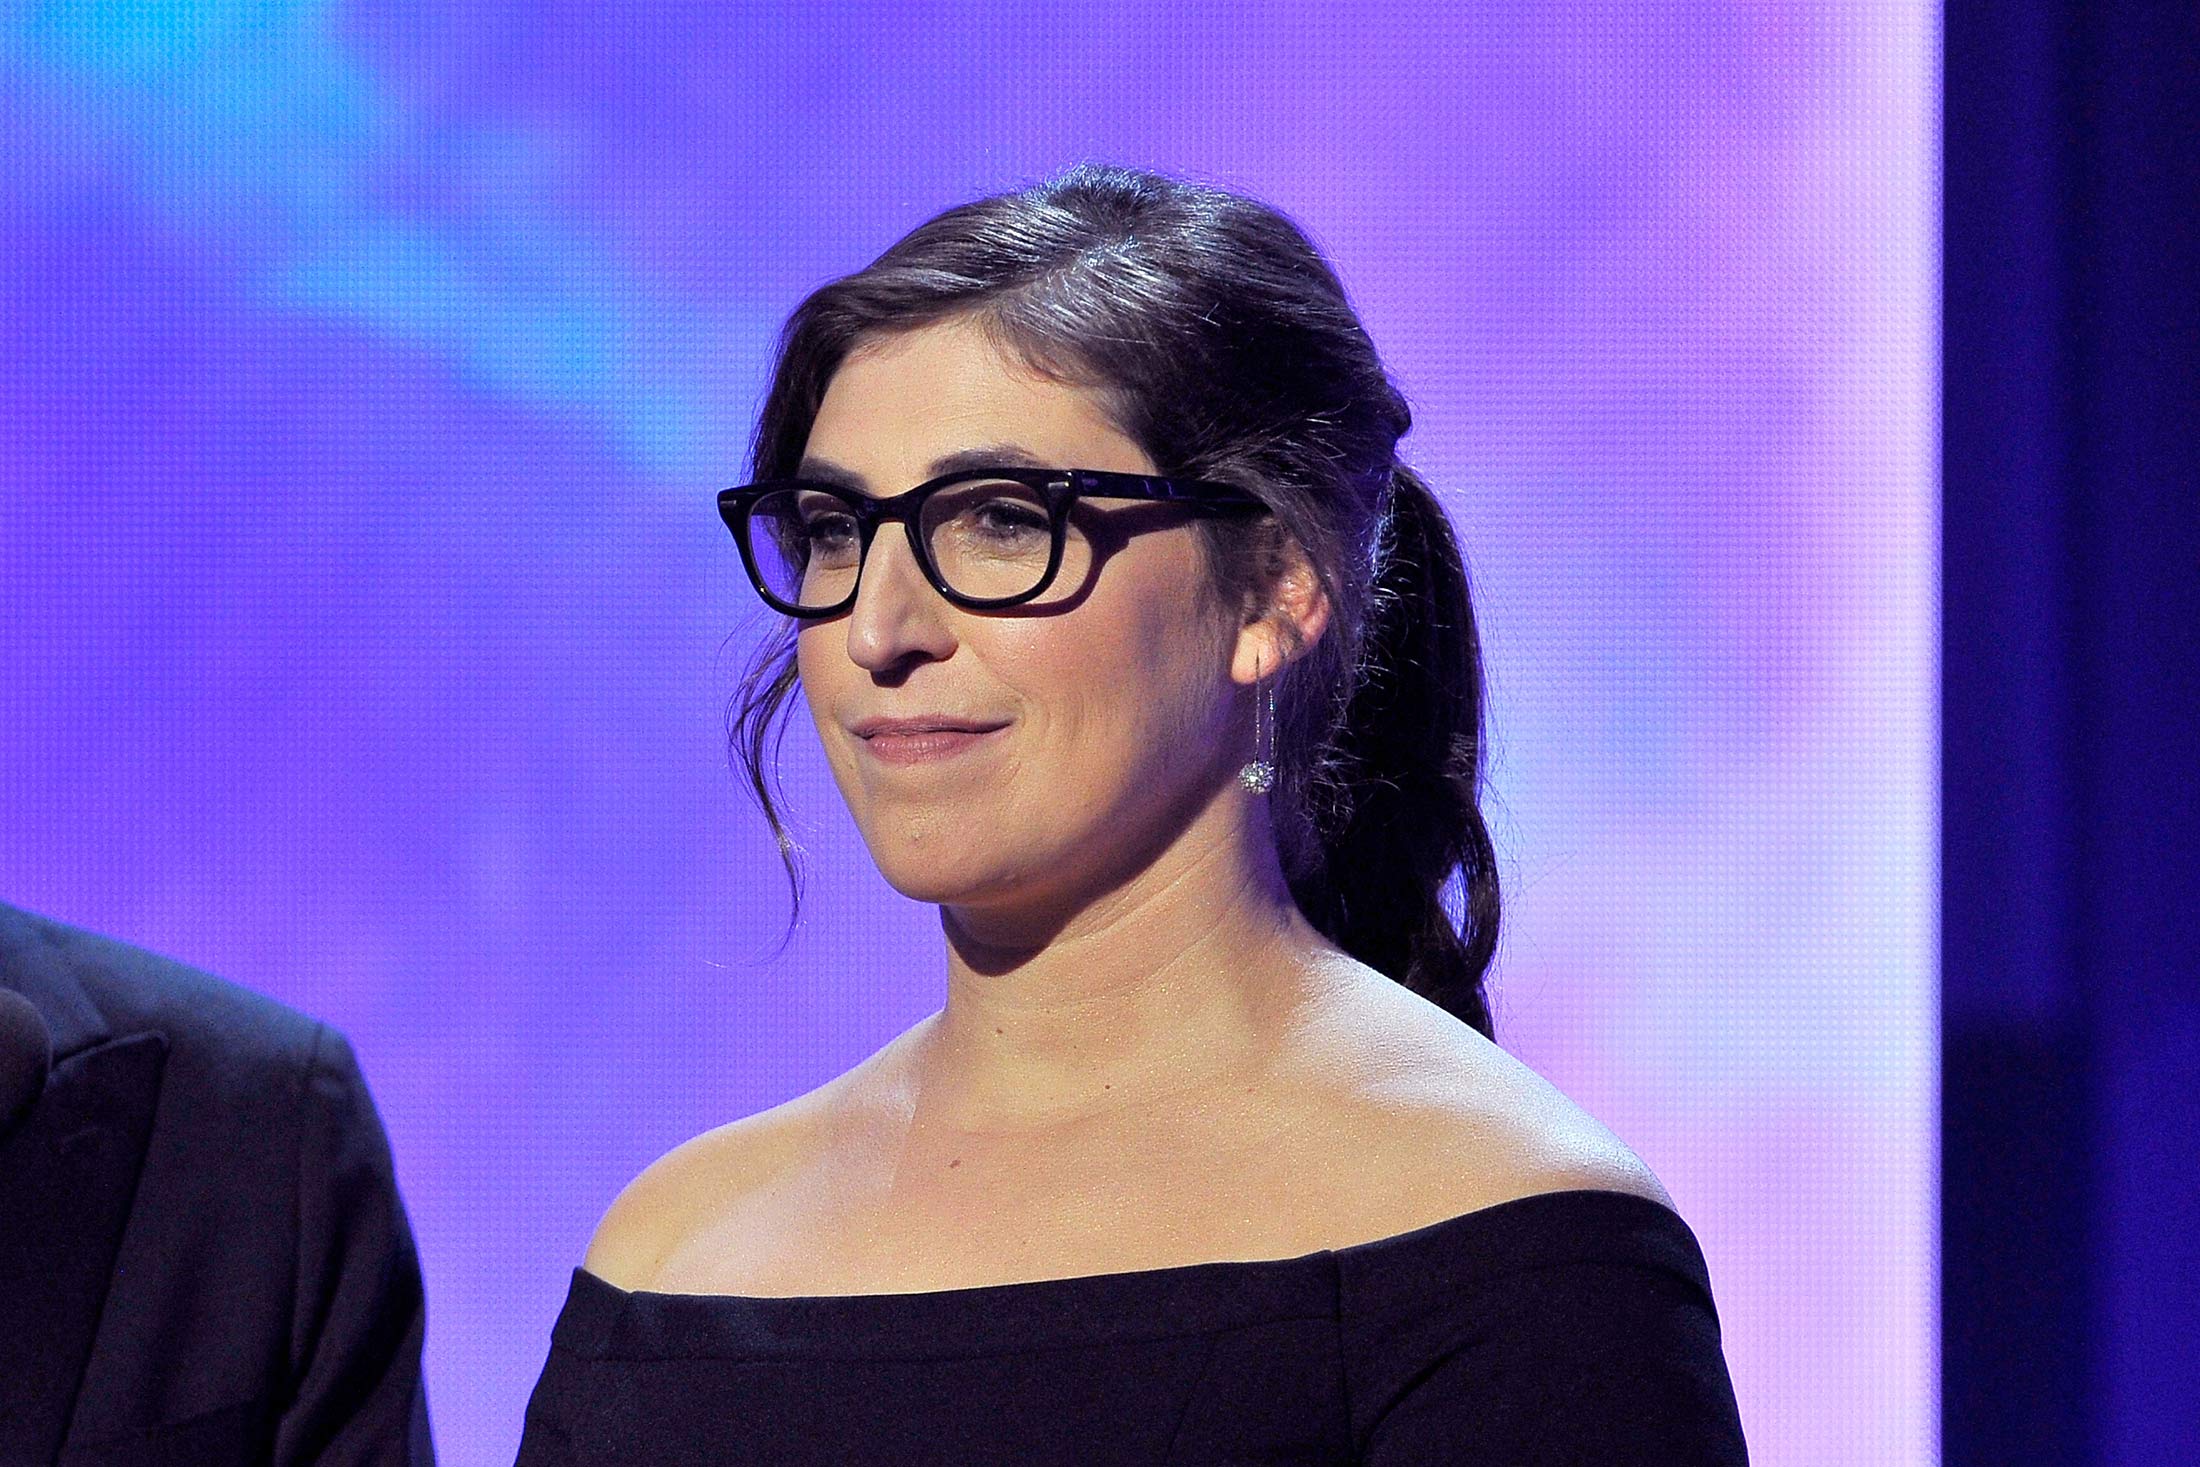 Mayim Bialik to be first guest host of 'Jeopardy!' following Mike